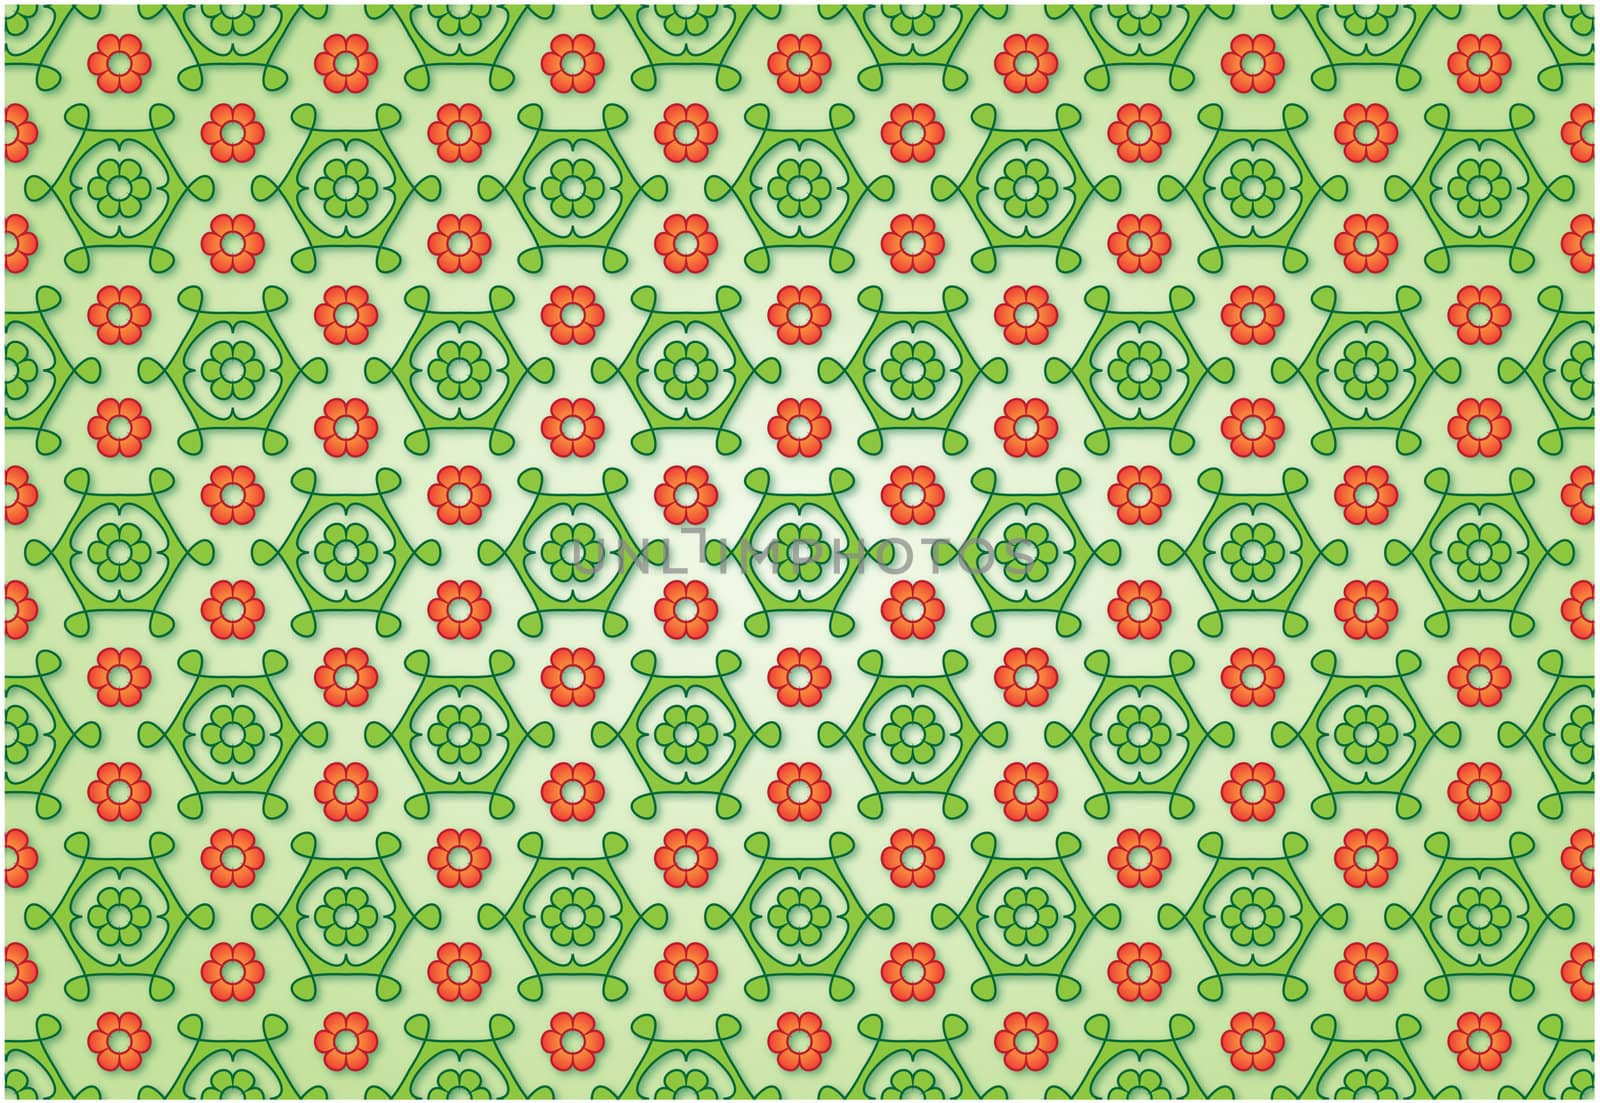 Spring flowered background with red and green little flowers